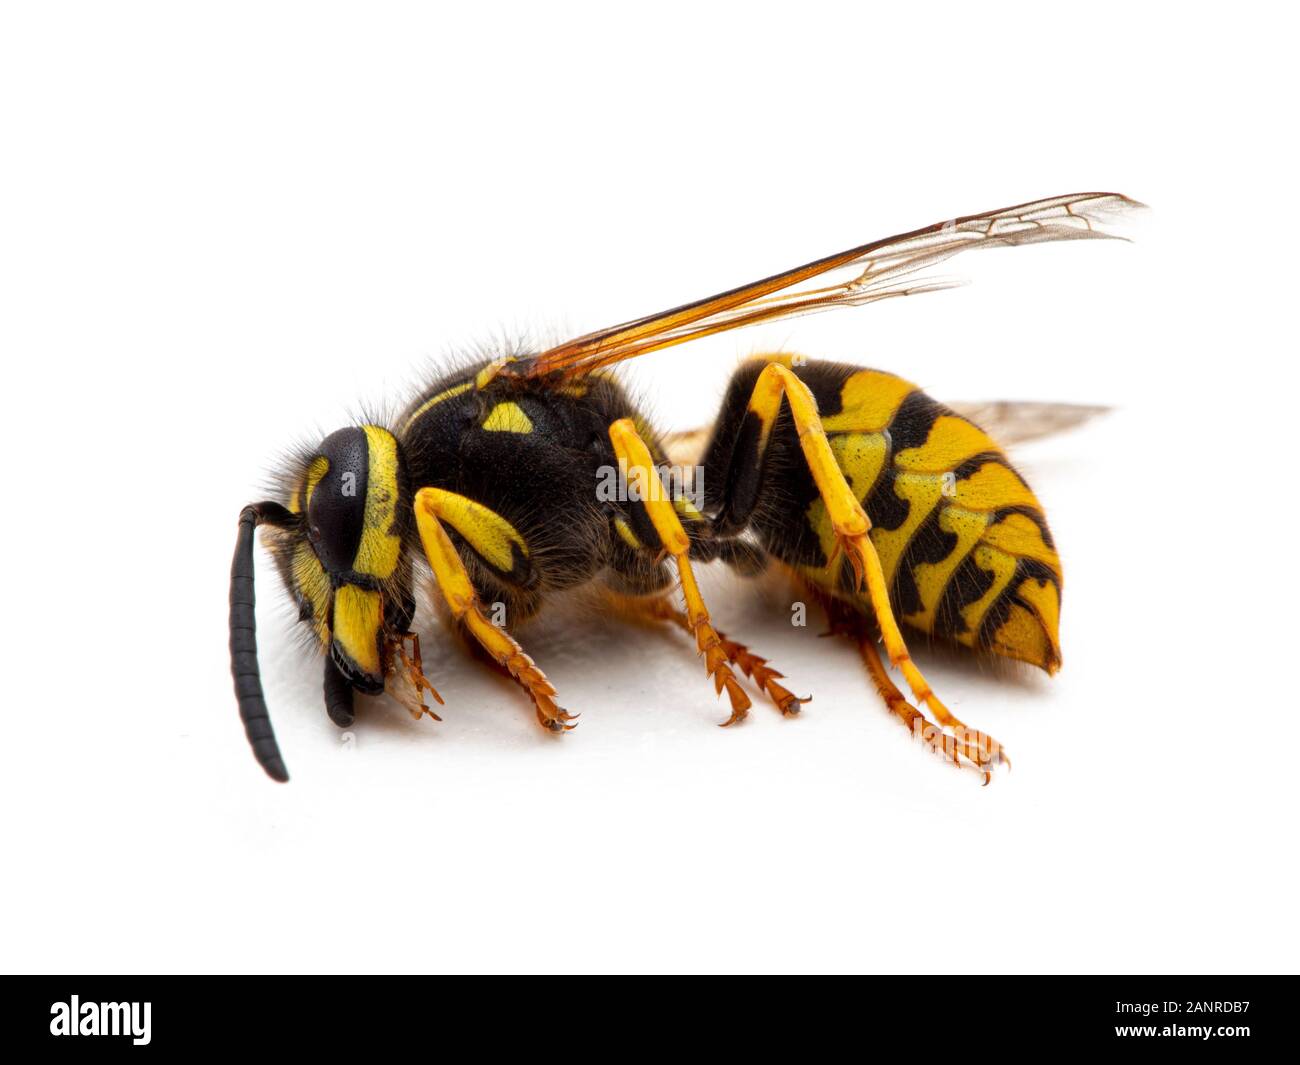 Dead German yellowjacket wasp, Vespula germanica, side view, isolated Stock Photo